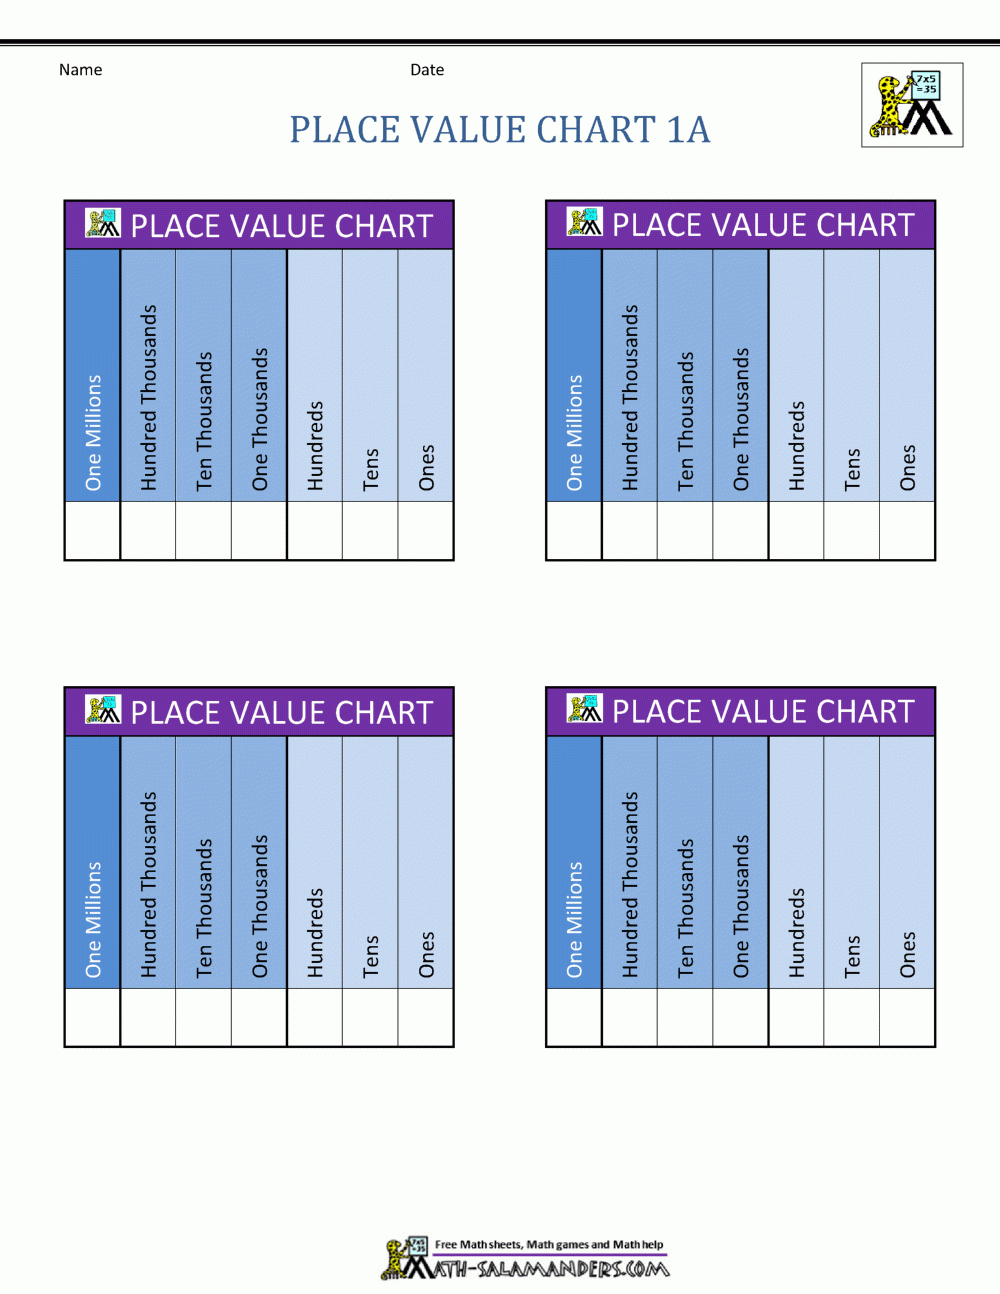 Place Value Charts - Free Printable Place Value Chart In Spanish